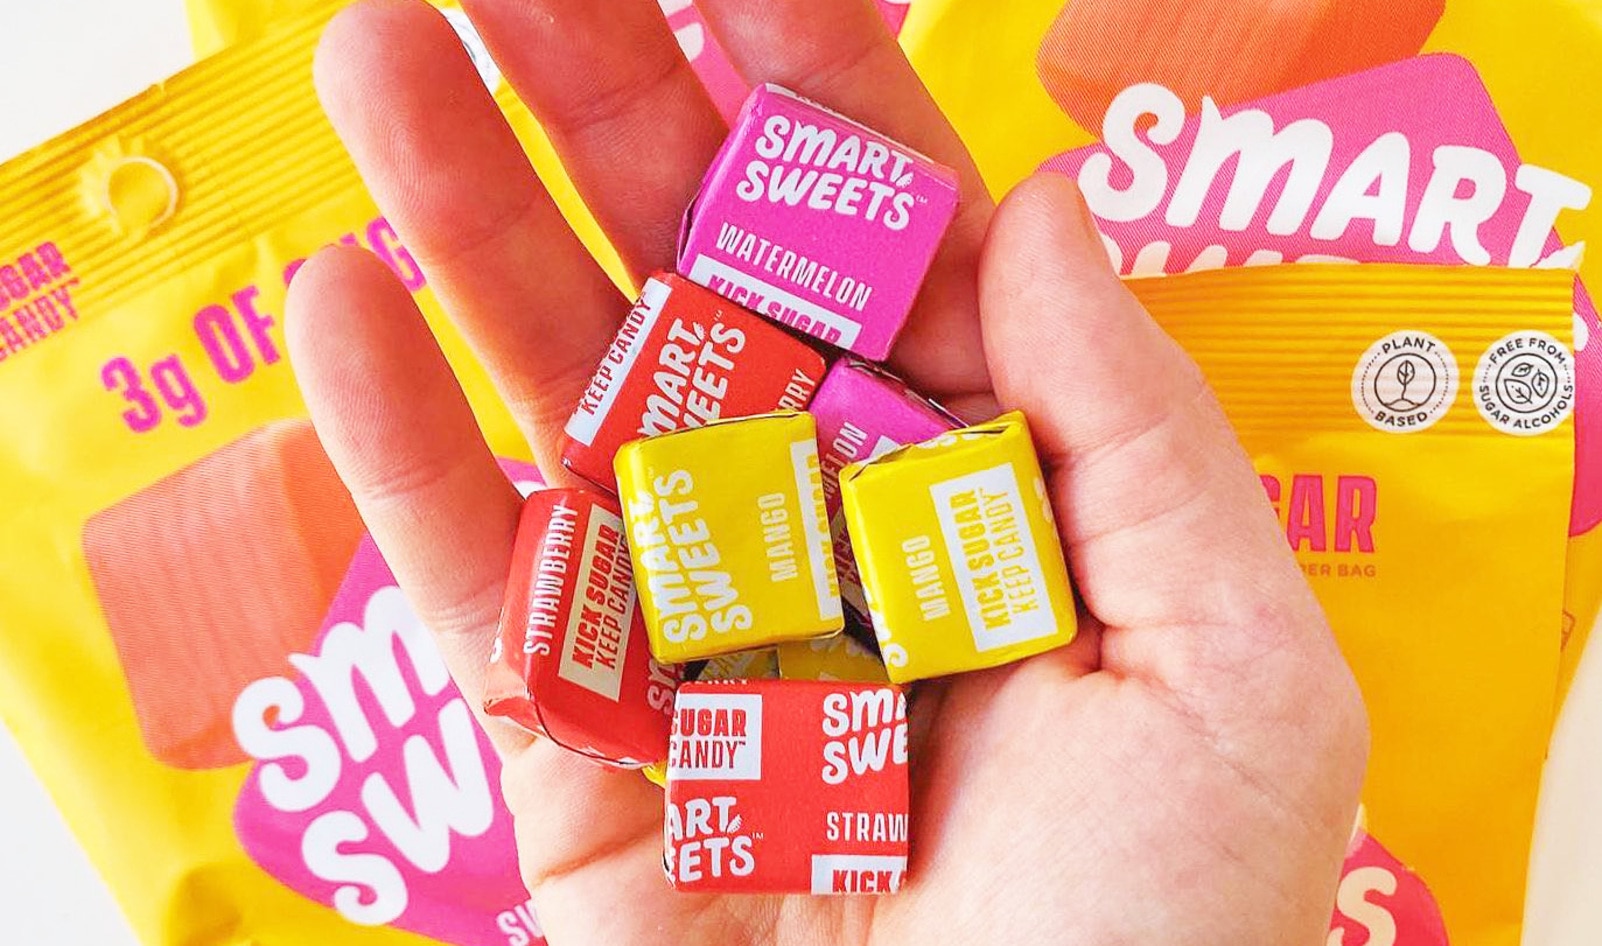 Woman-Owned Candy Brand Launches Vegan Version of Starburst